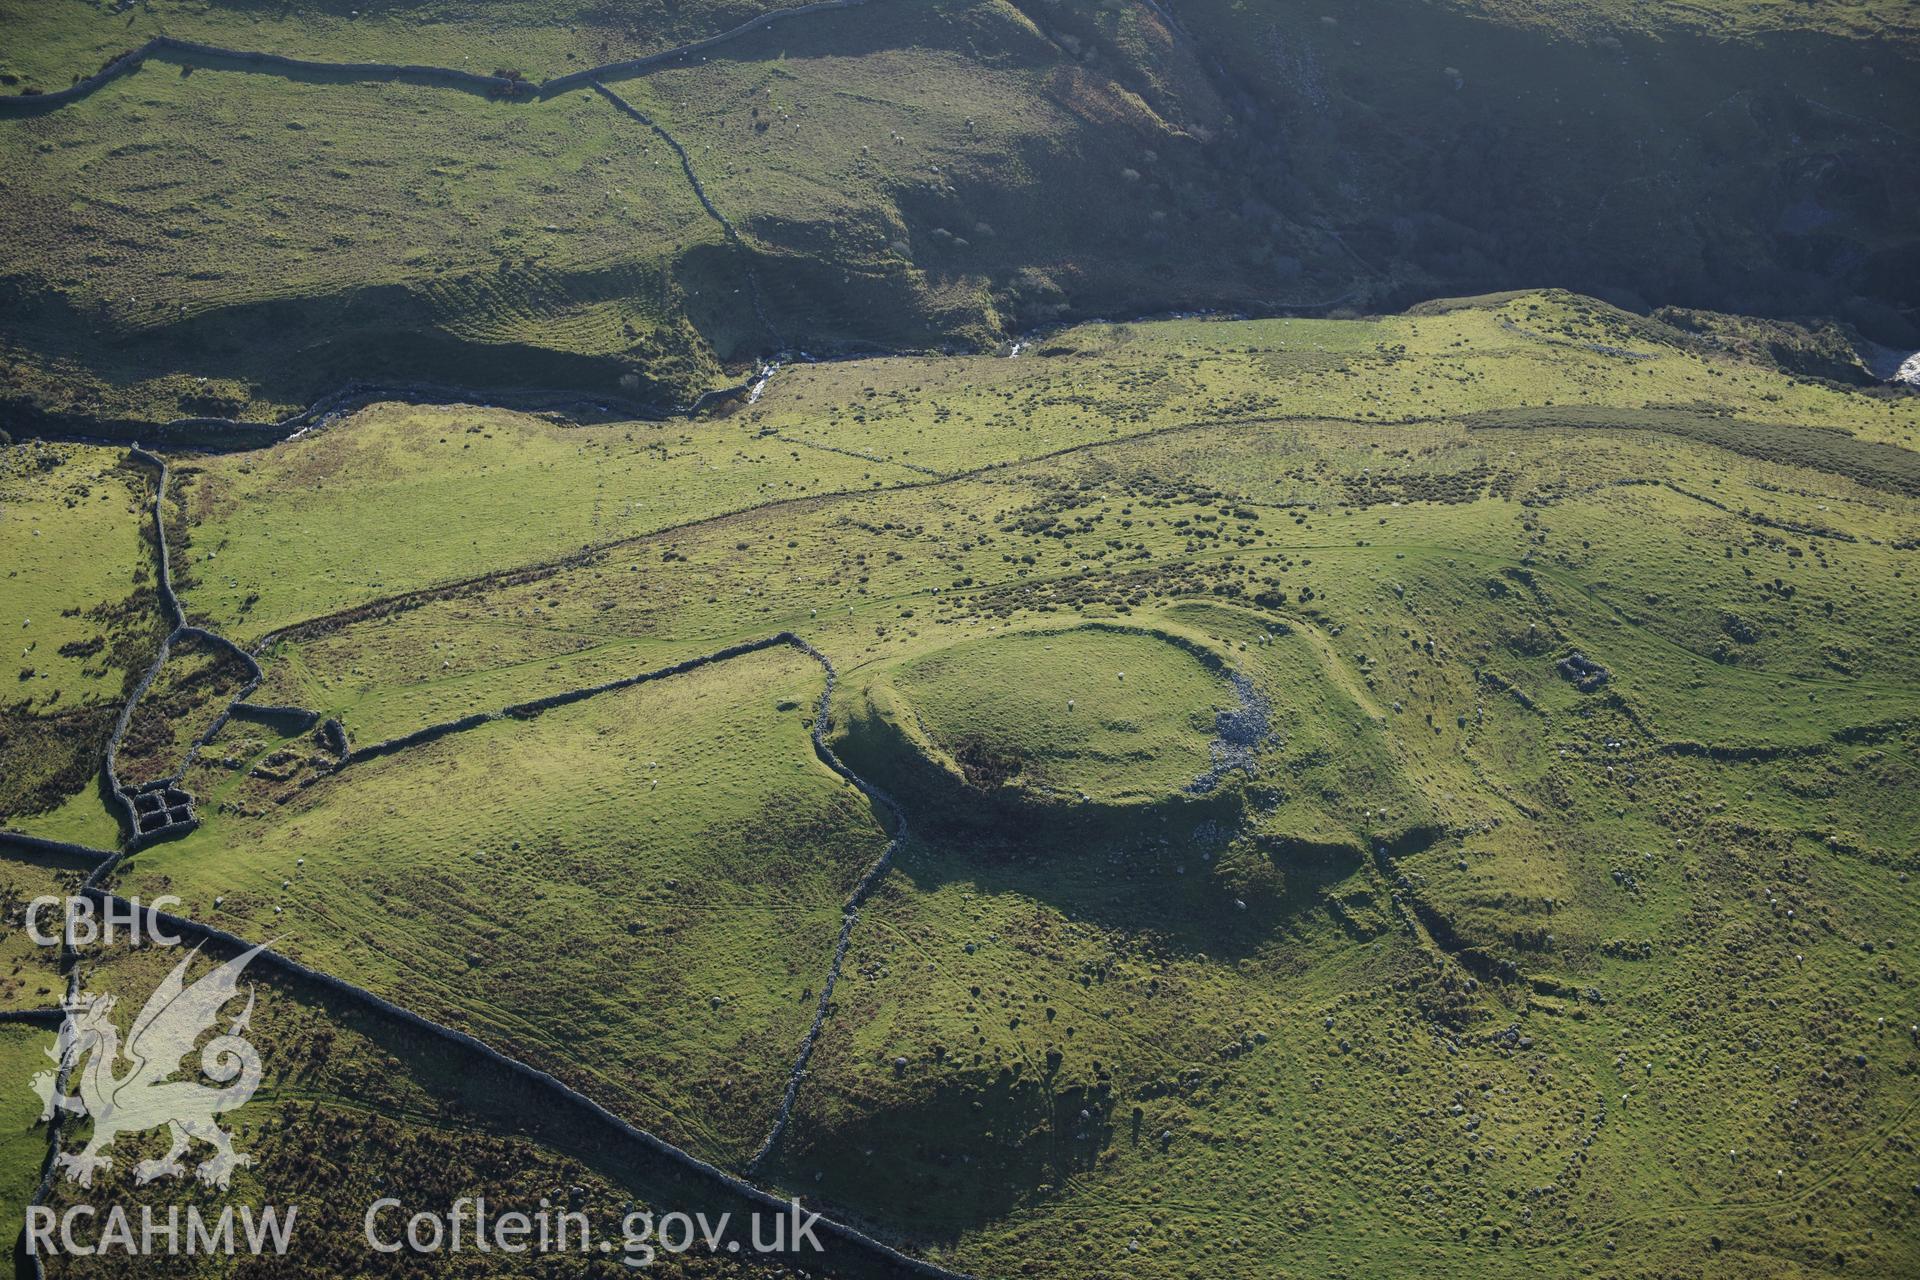 RCAHMW colour oblique photograph of Pen y Dinas, hillfort and upland landscape. Taken by Toby Driver on 10/12/2012.